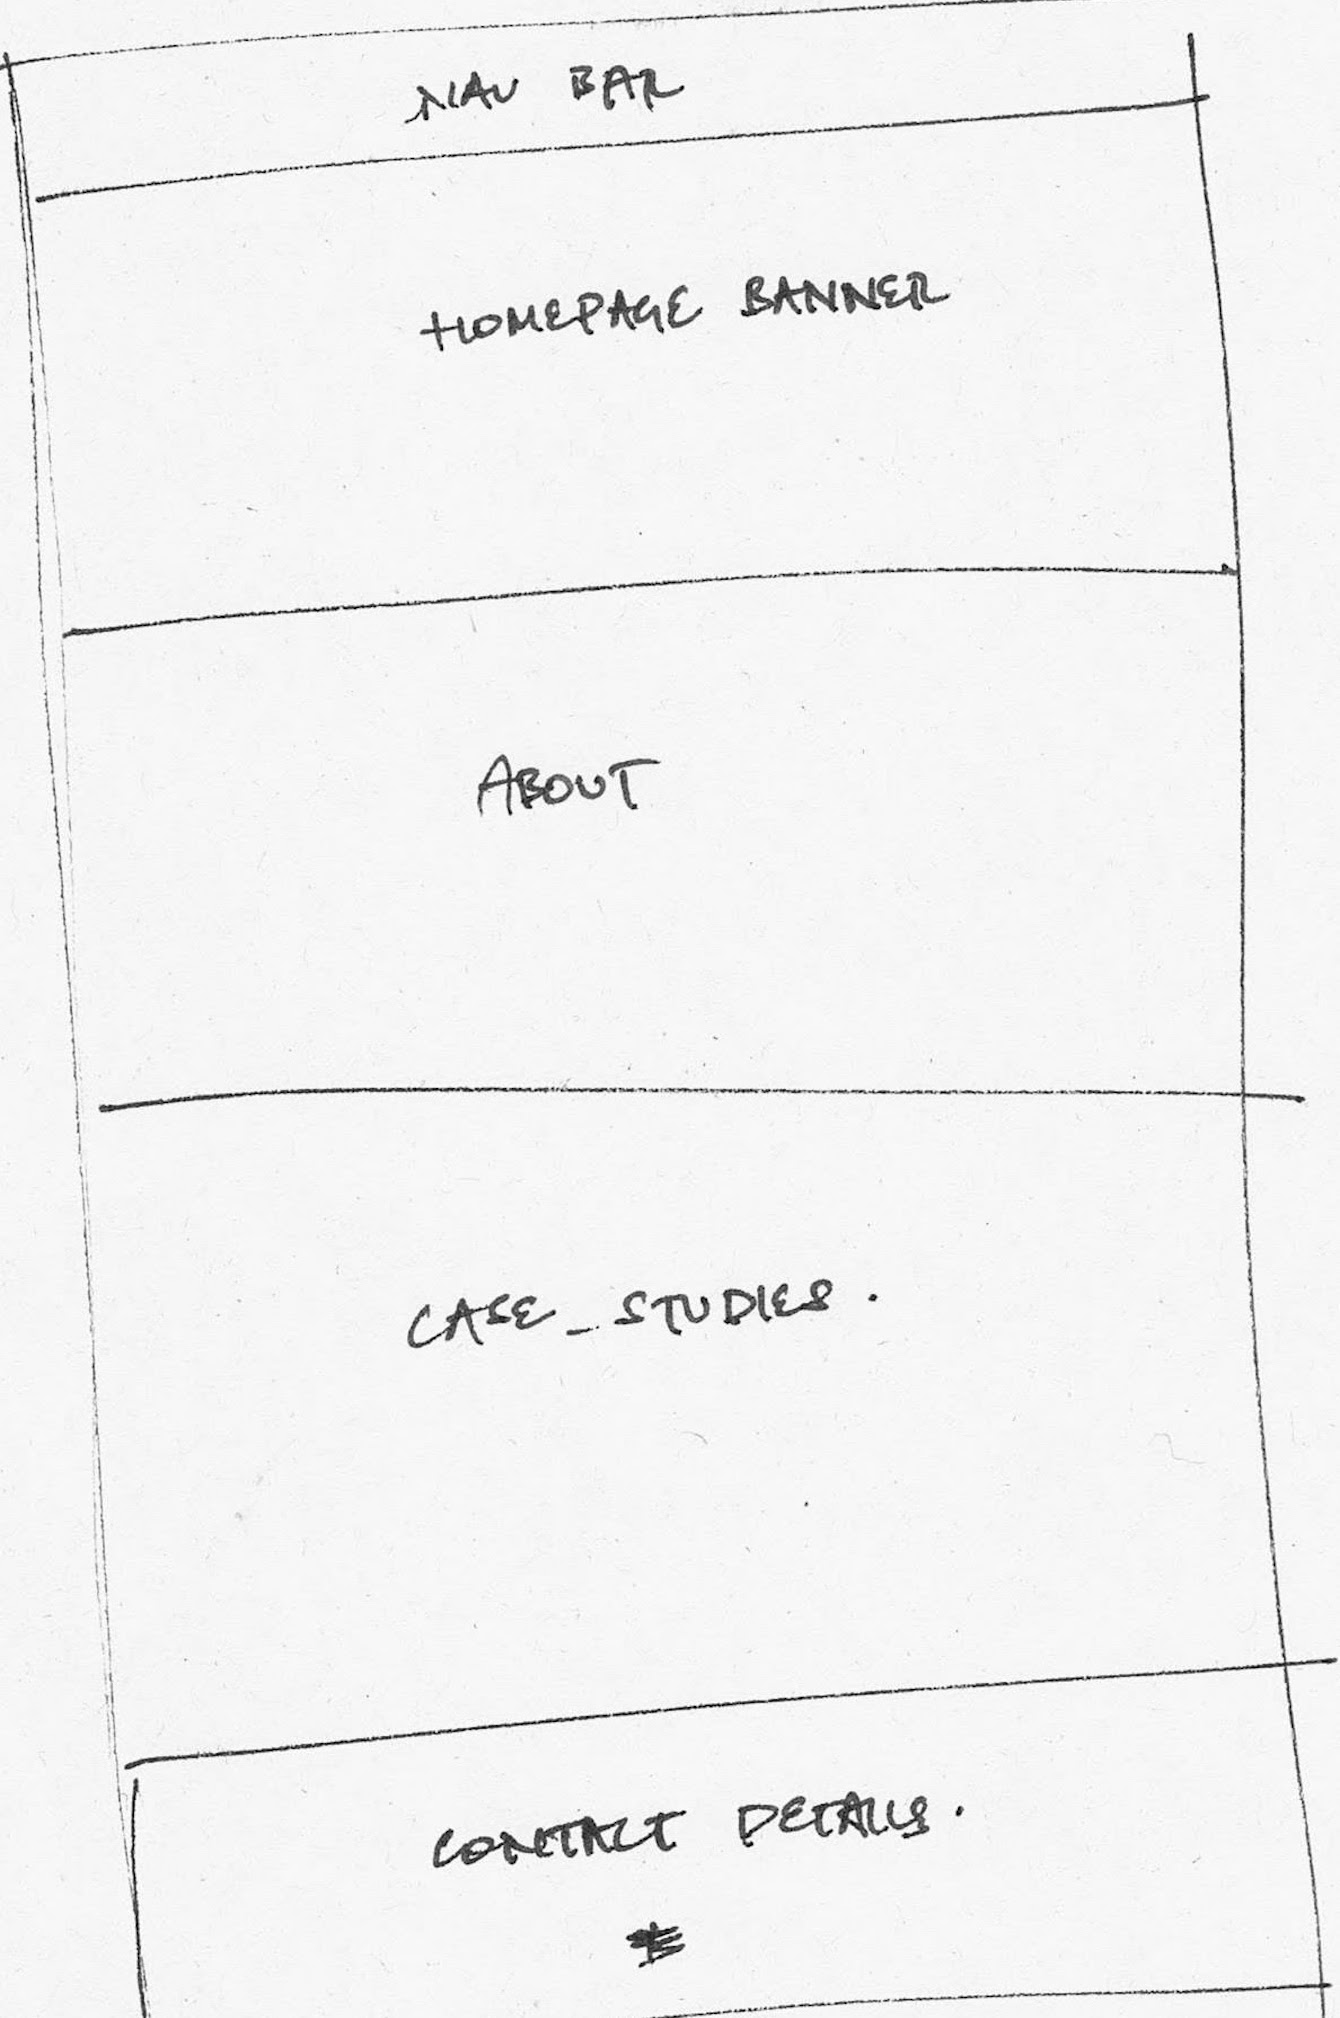 Initial handrawn sketch of the layout which divides the screen into six compartments. 
                                    At the top, there is the nav bar, then a homepage banner followed by an about section, case studies section, contact section
                                    and the footer.